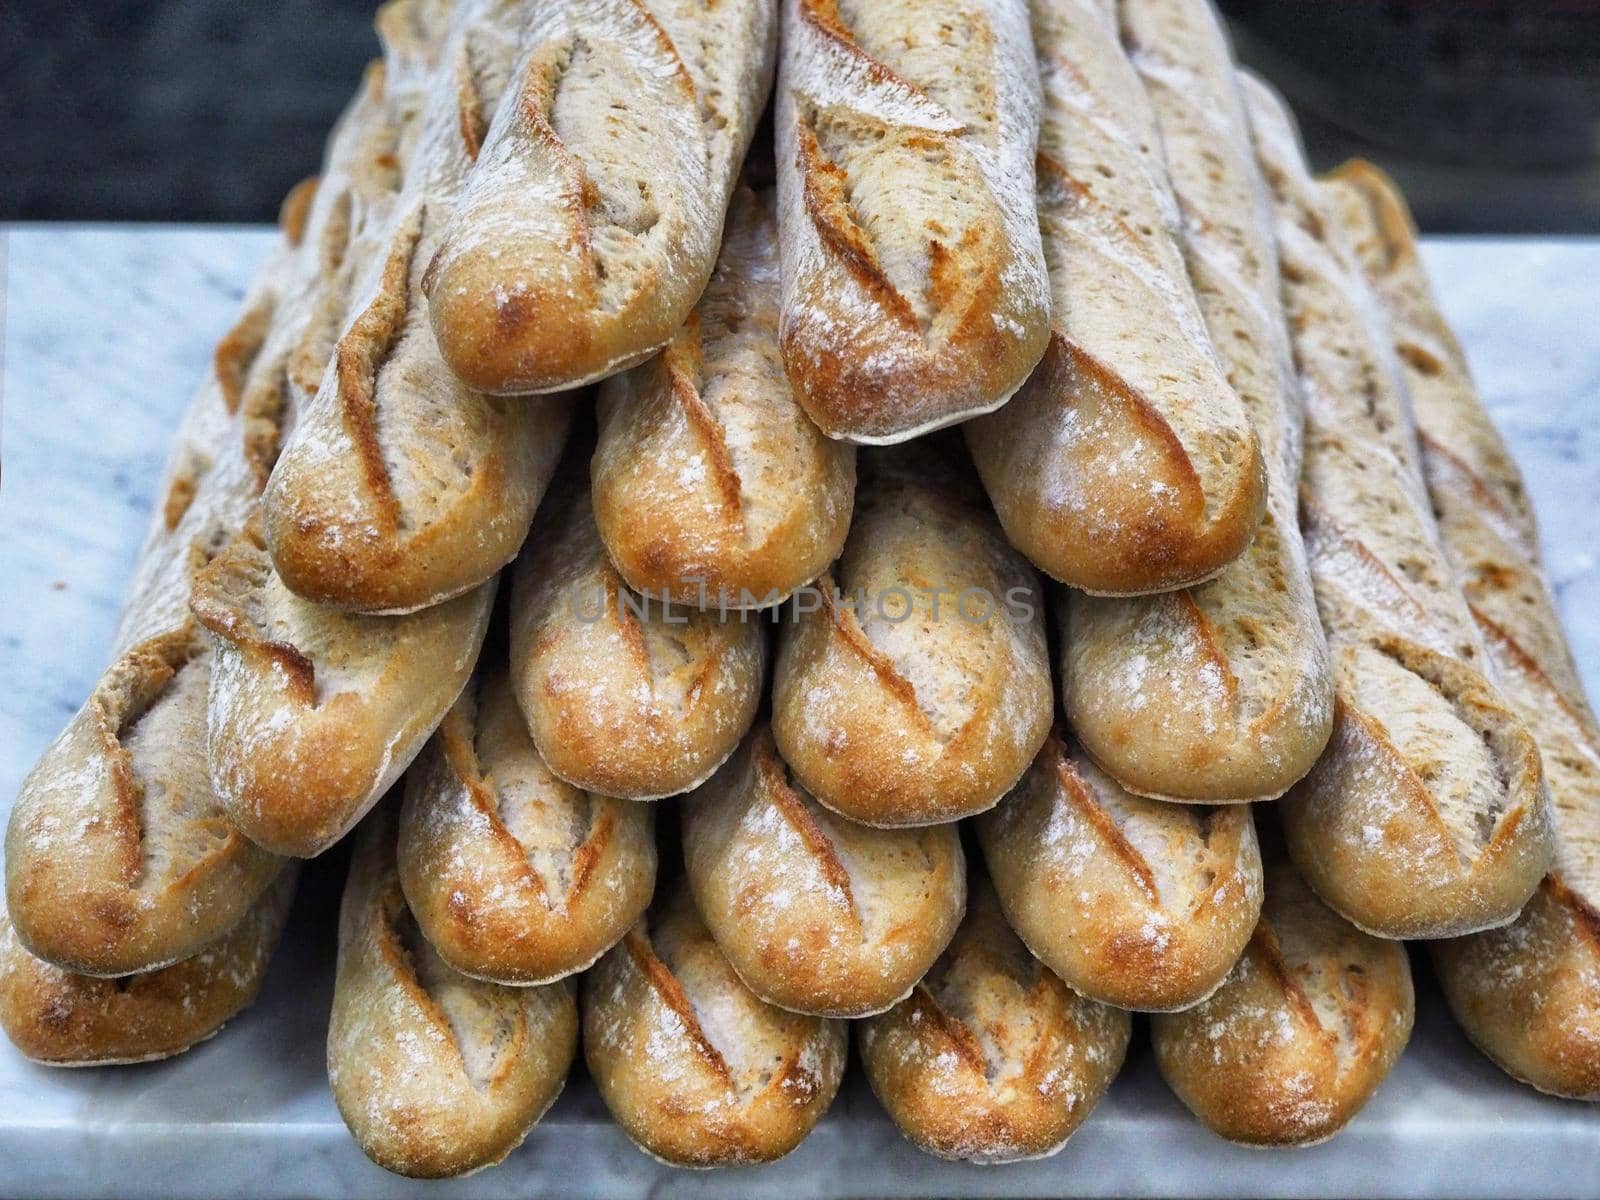 Freshly baked bread loaves stacked typical french baguette close up view by lemar